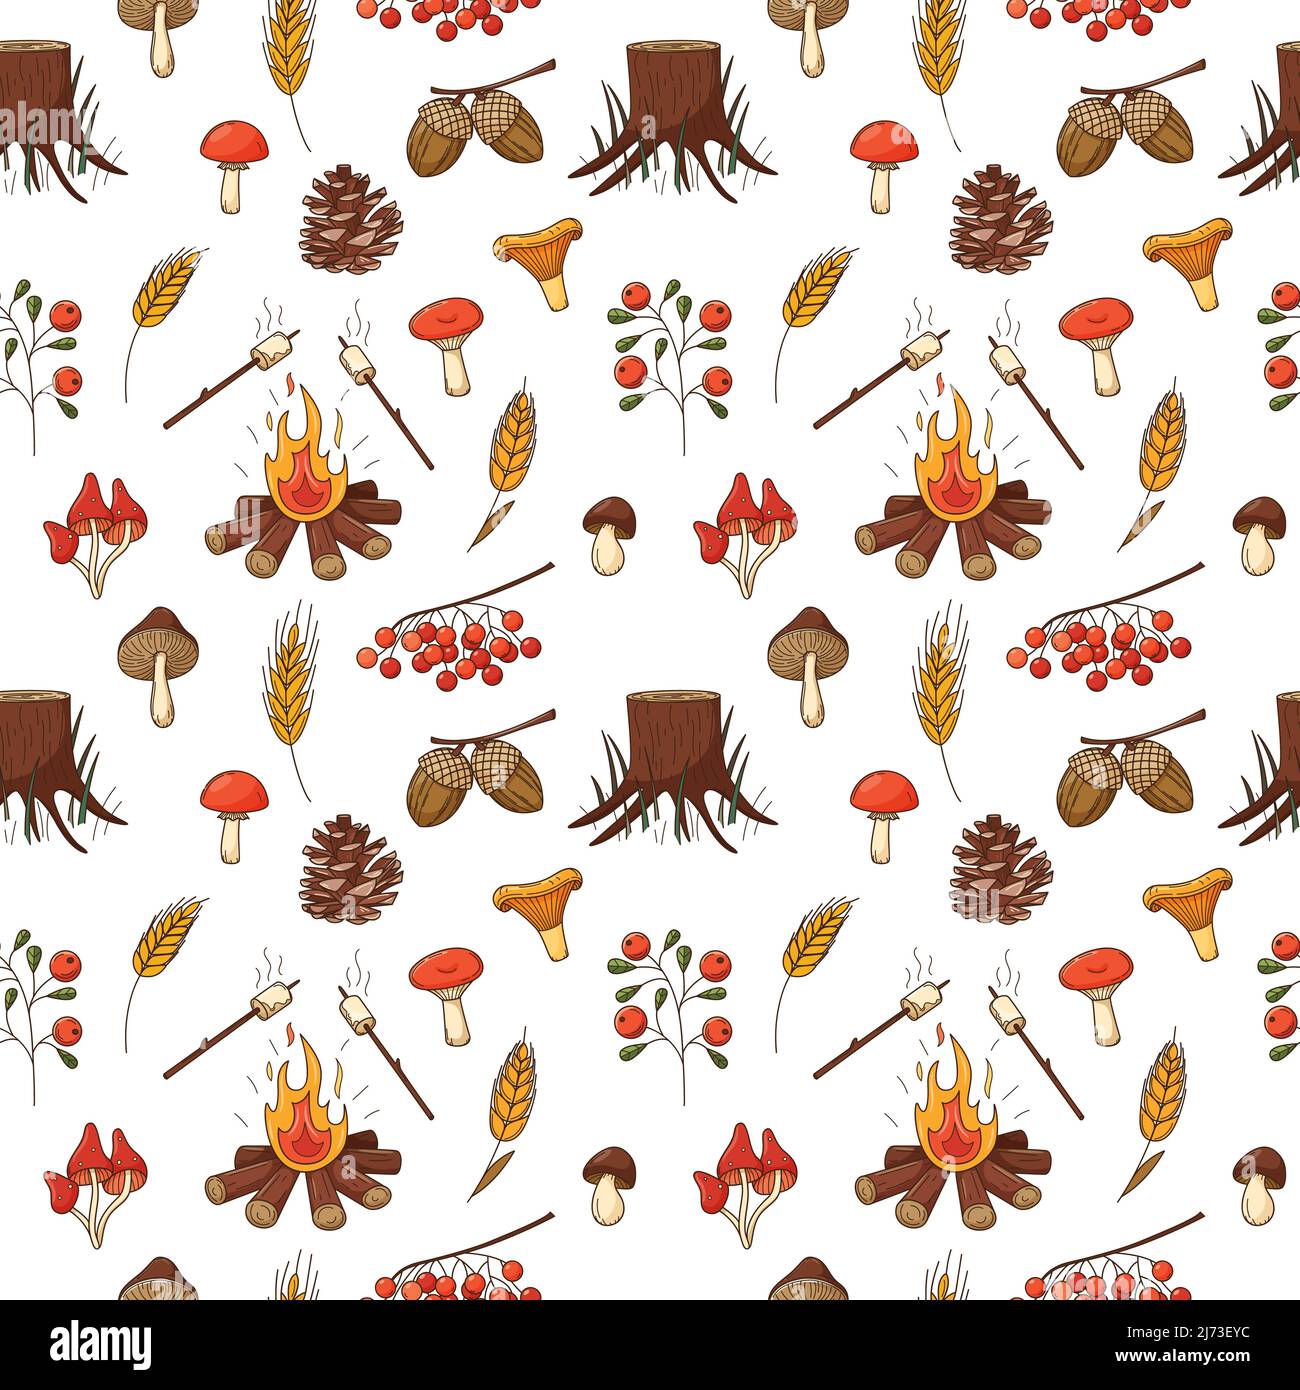 Seamless pattern with autumn, forest harvest. Pine cone, mushrooms, bonfire, stump, berry, marshmallow, acorns. Backdrop with colored doodle elements. Stock Vector